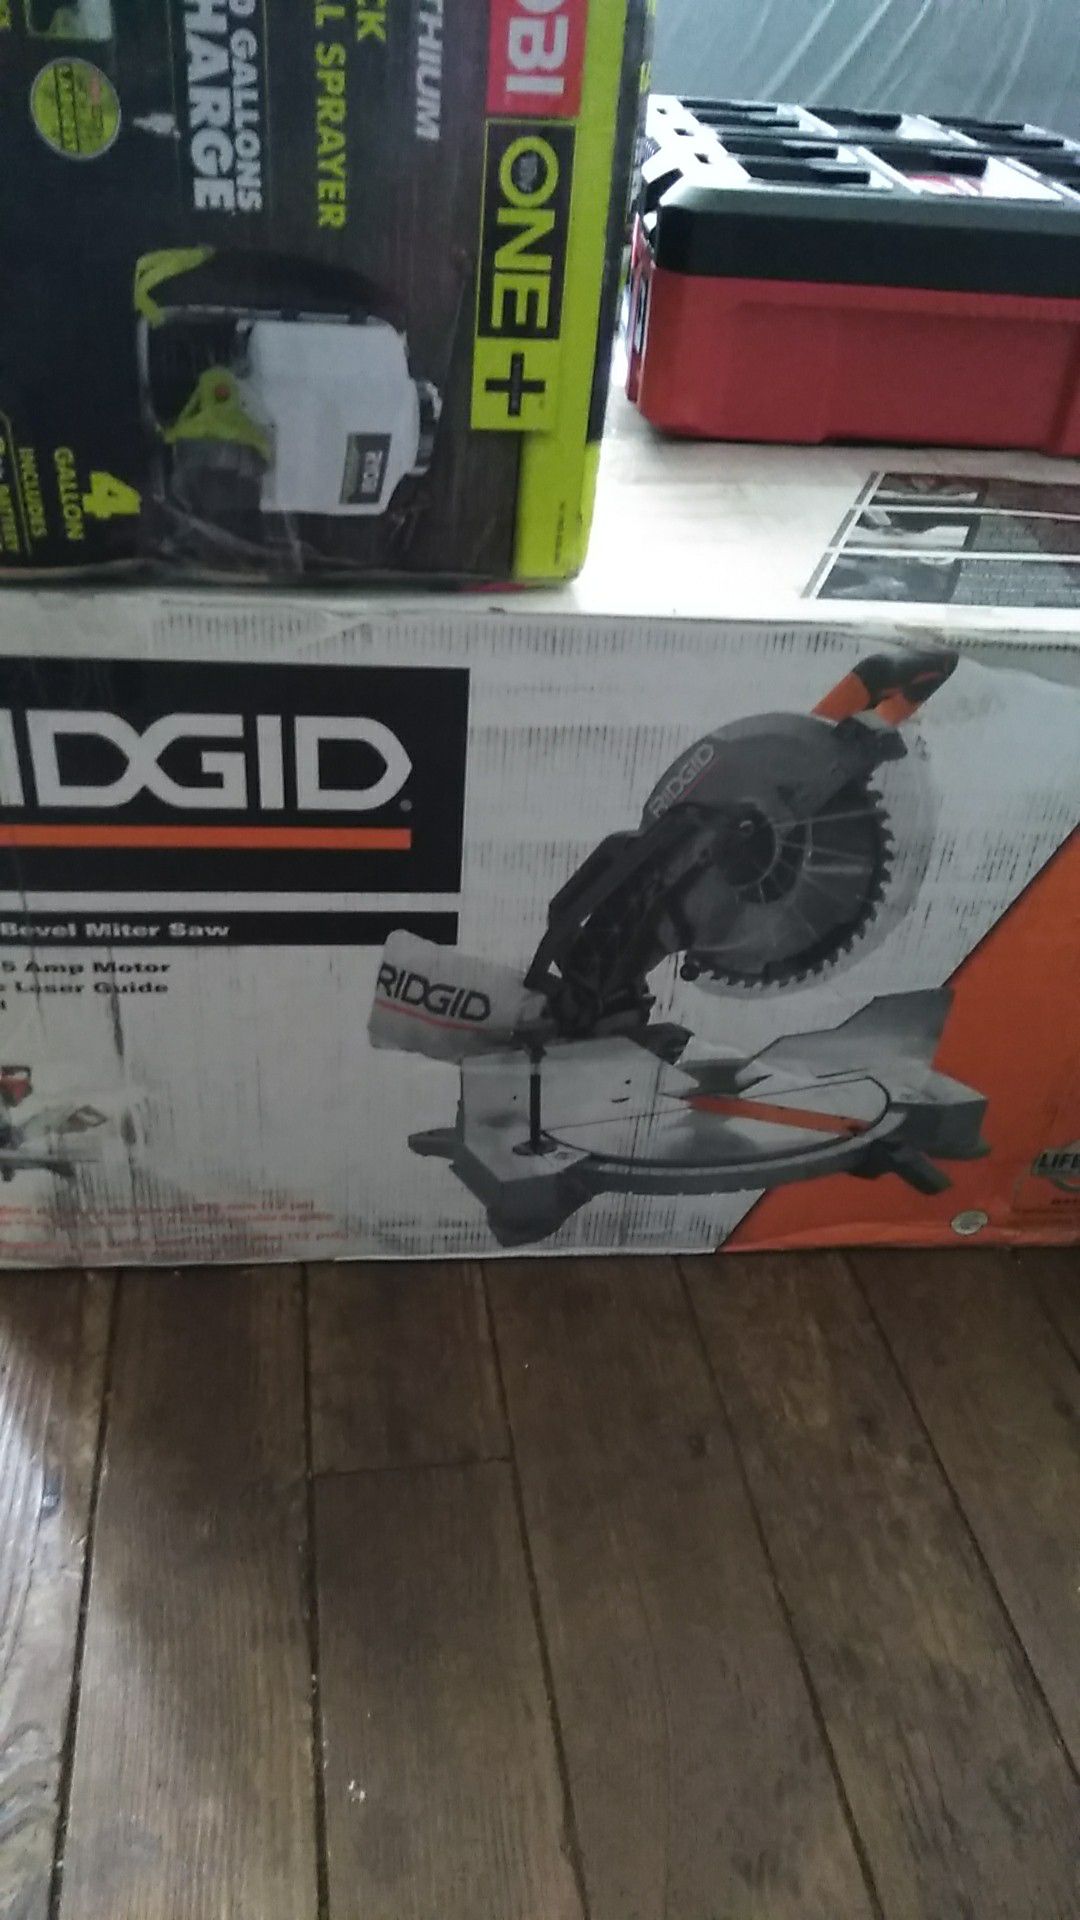 Ridgid 15 Amp Corded 12 in. Dual Bevel Miter Saw with Adjustable Laser Guide, Carbide Tipped Blade, and Dust Bag. Bnib $150